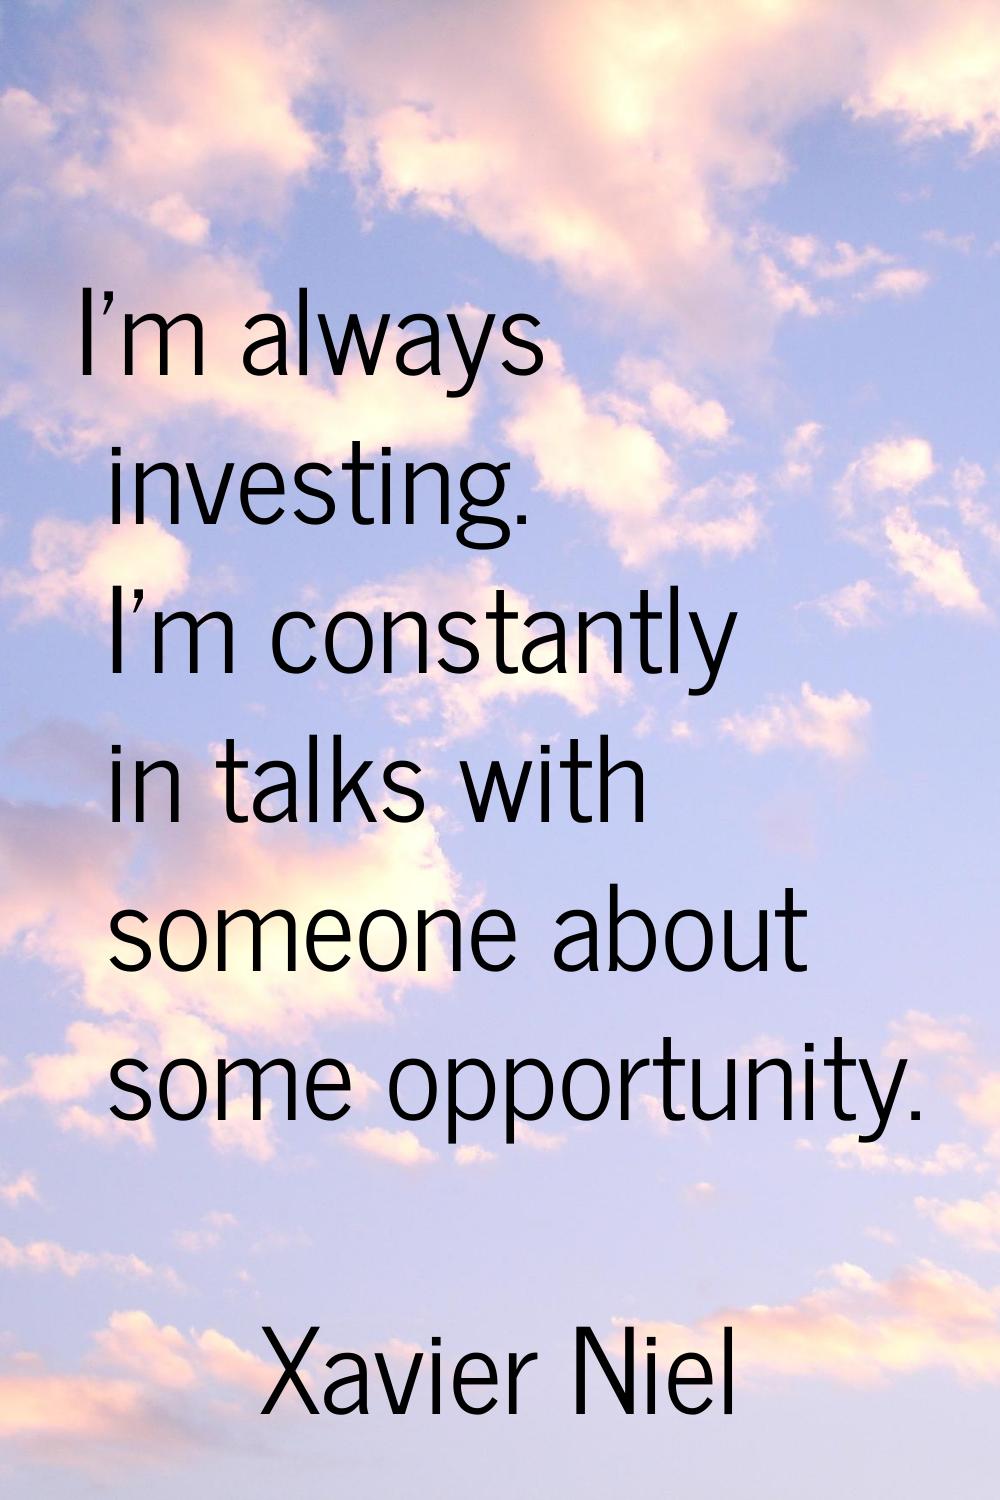 I'm always investing. I'm constantly in talks with someone about some opportunity.